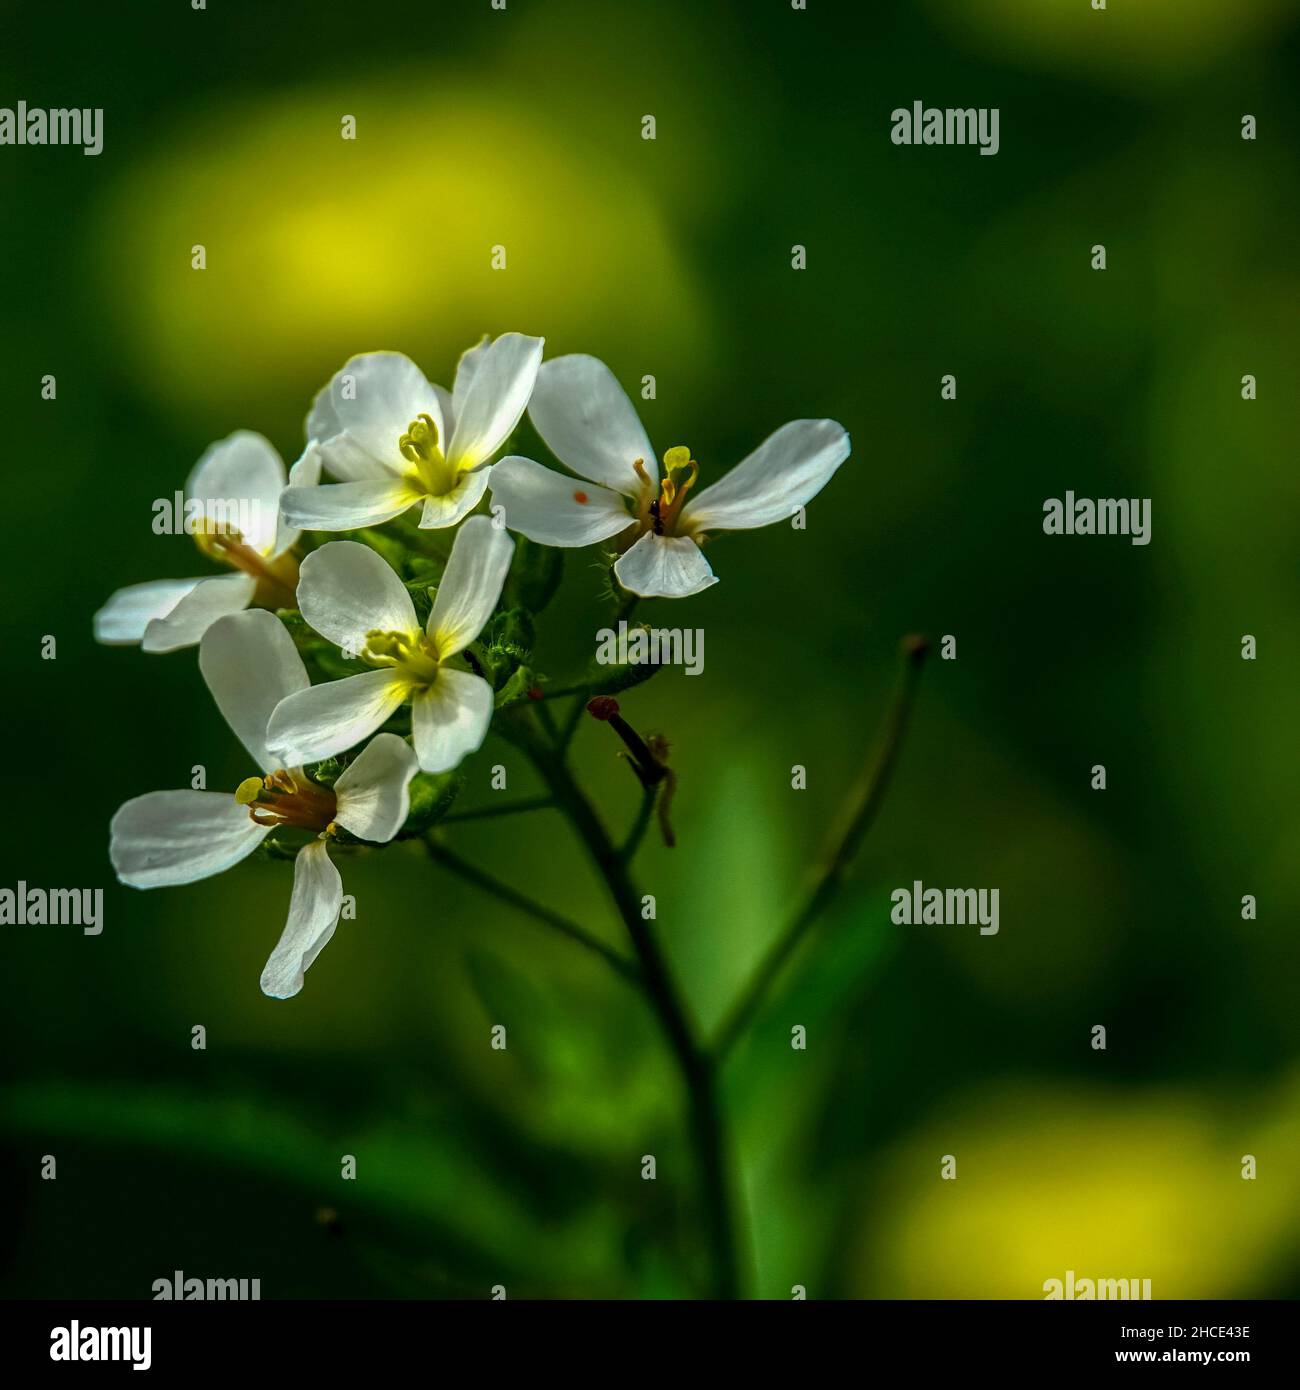 Selective focus of a White flower growing on a long stem Stock Photo